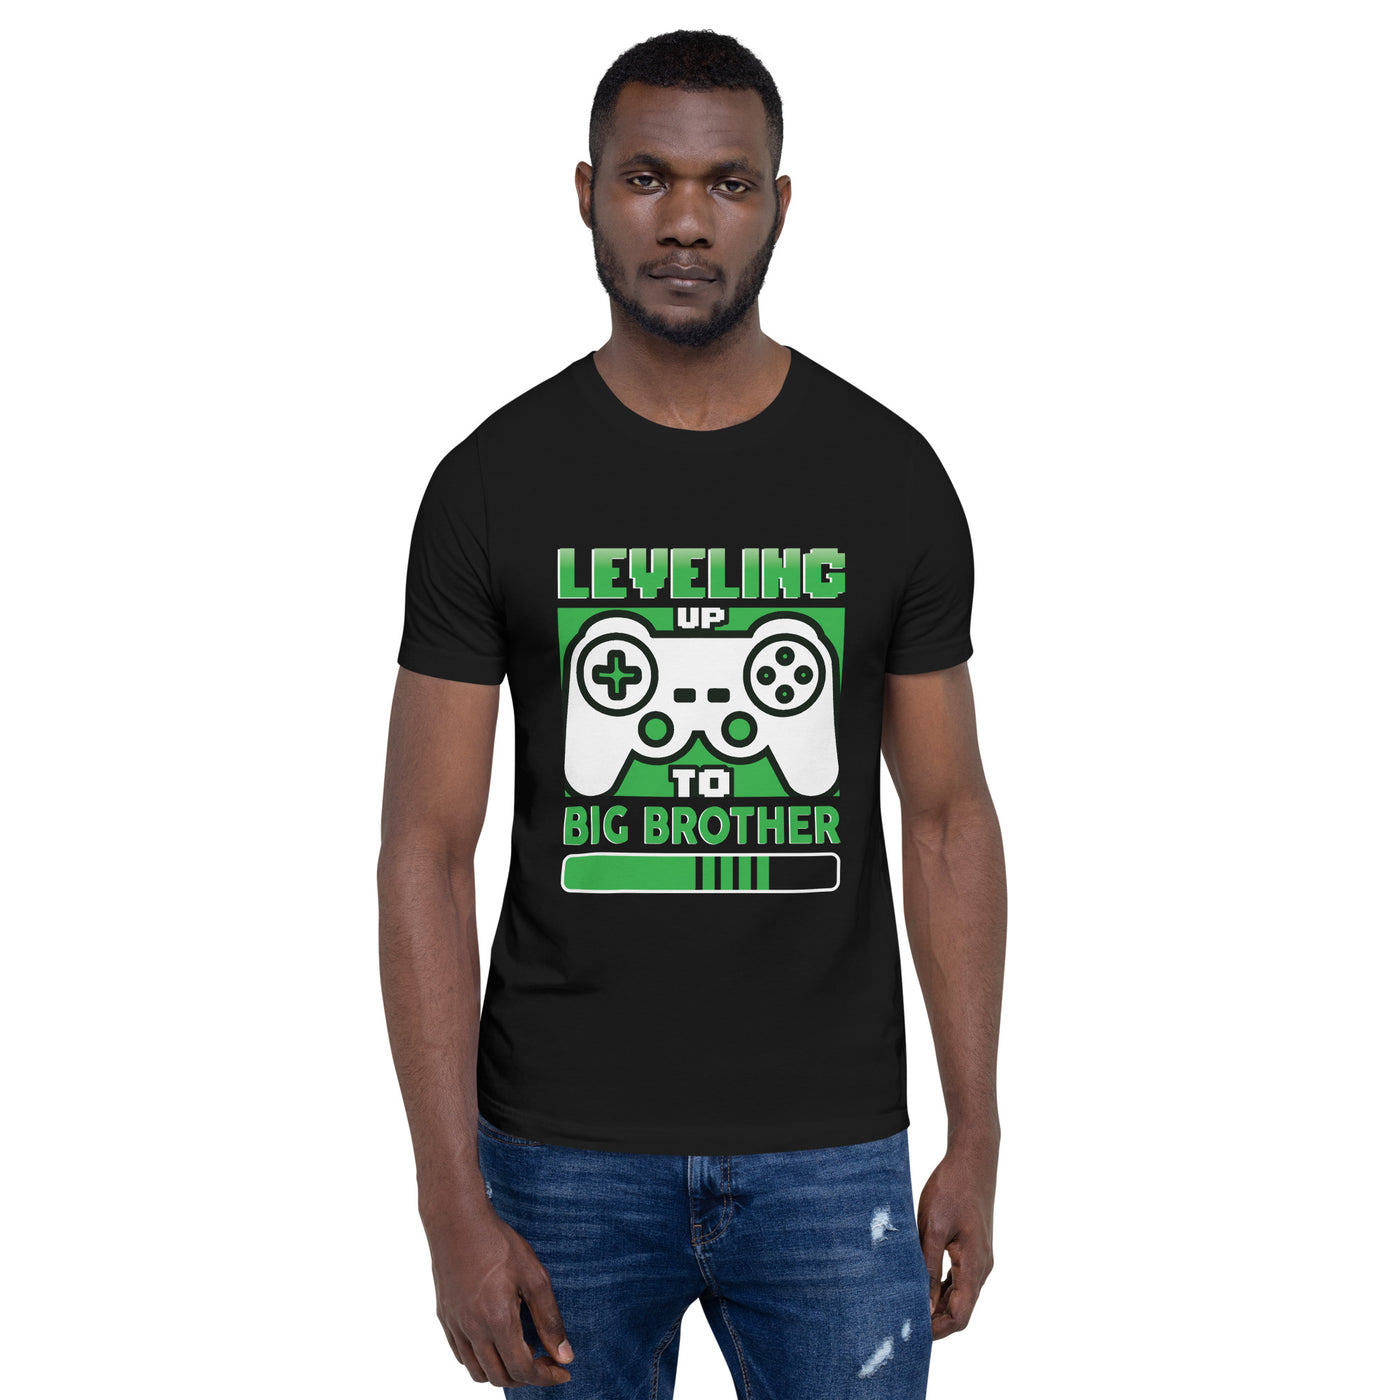 Levelling Up to Big Brother - Unisex t-shirt